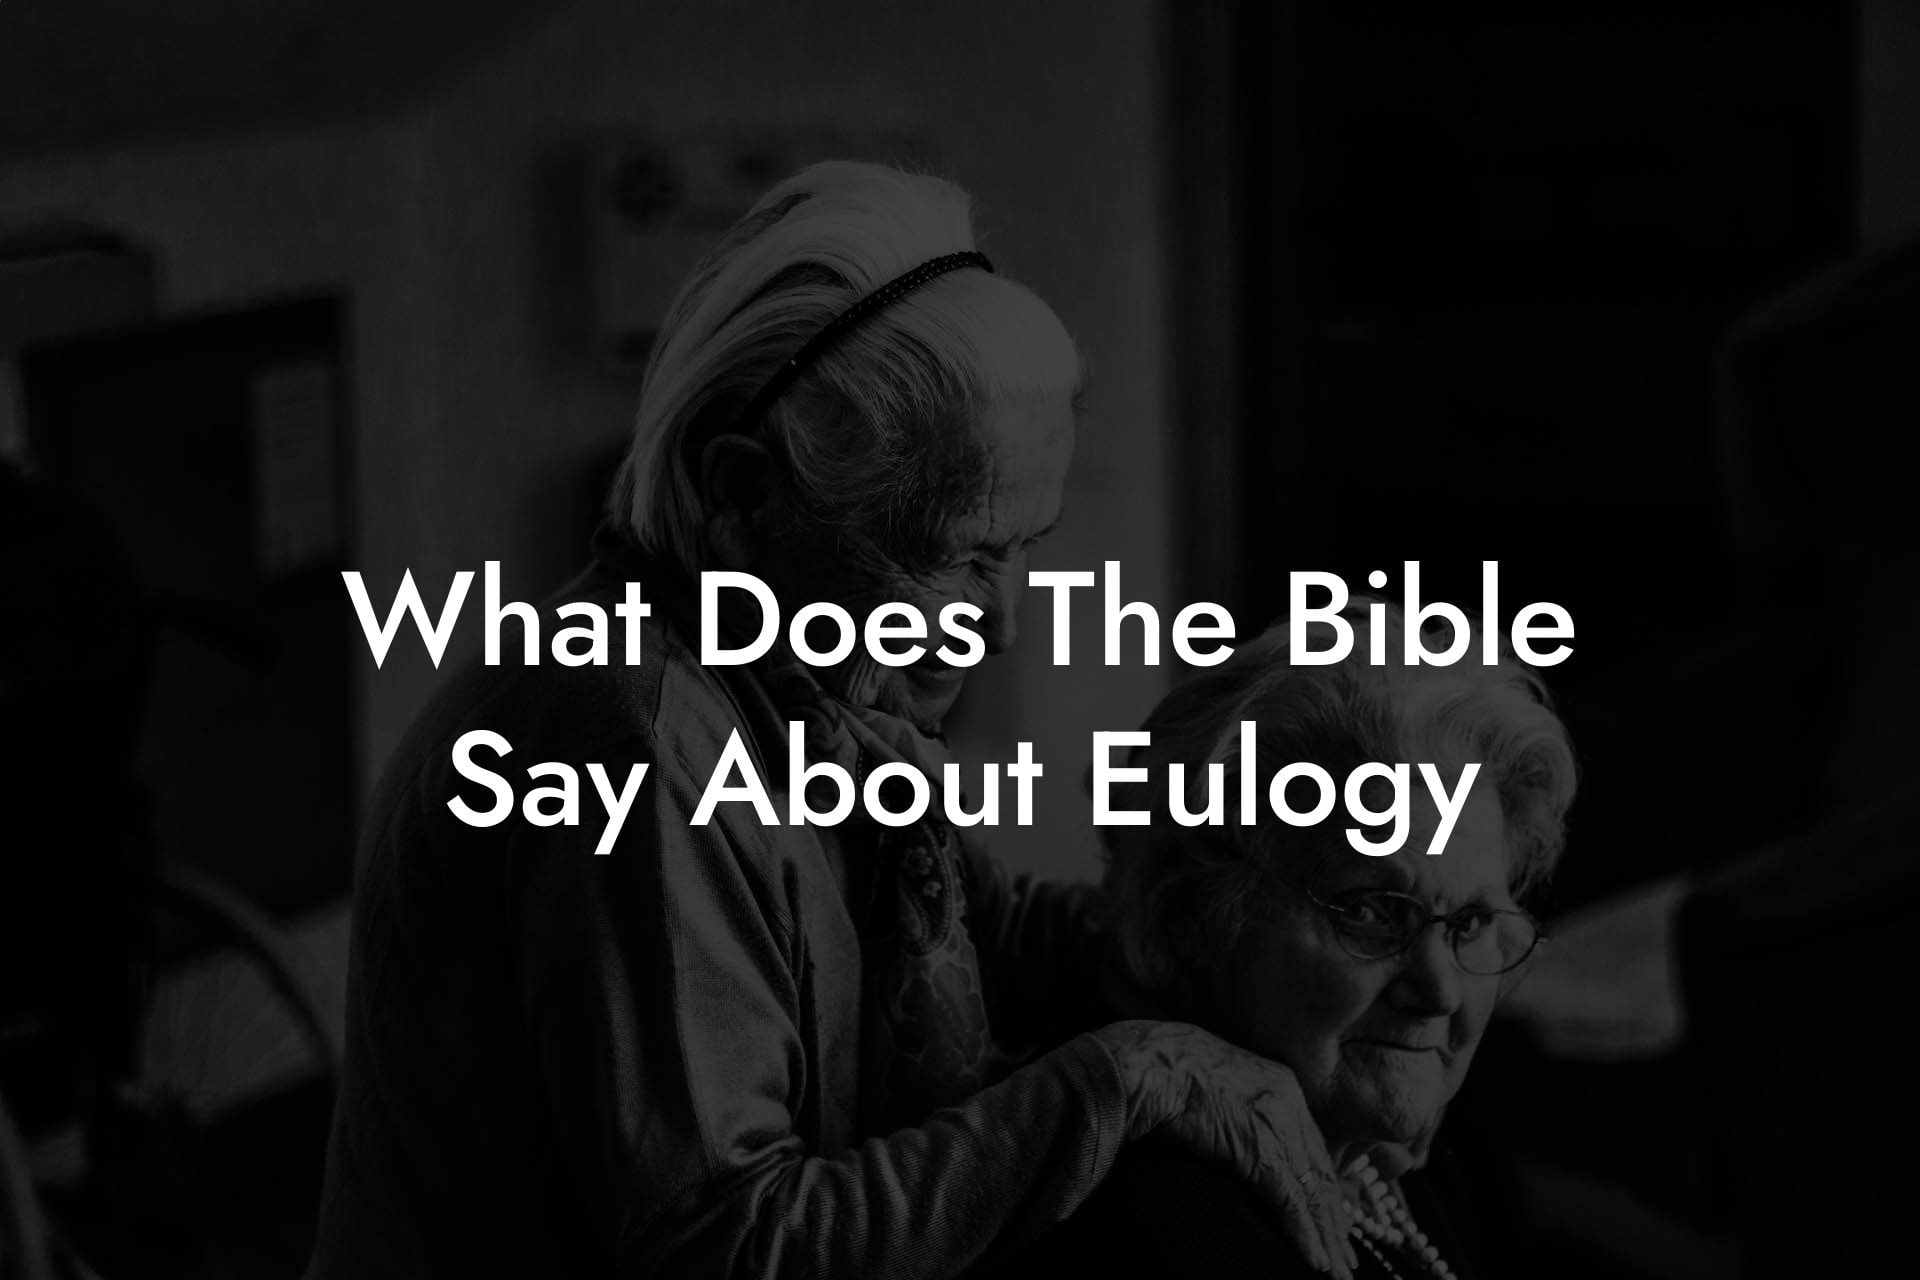 What Does The Bible Say About Eulogy